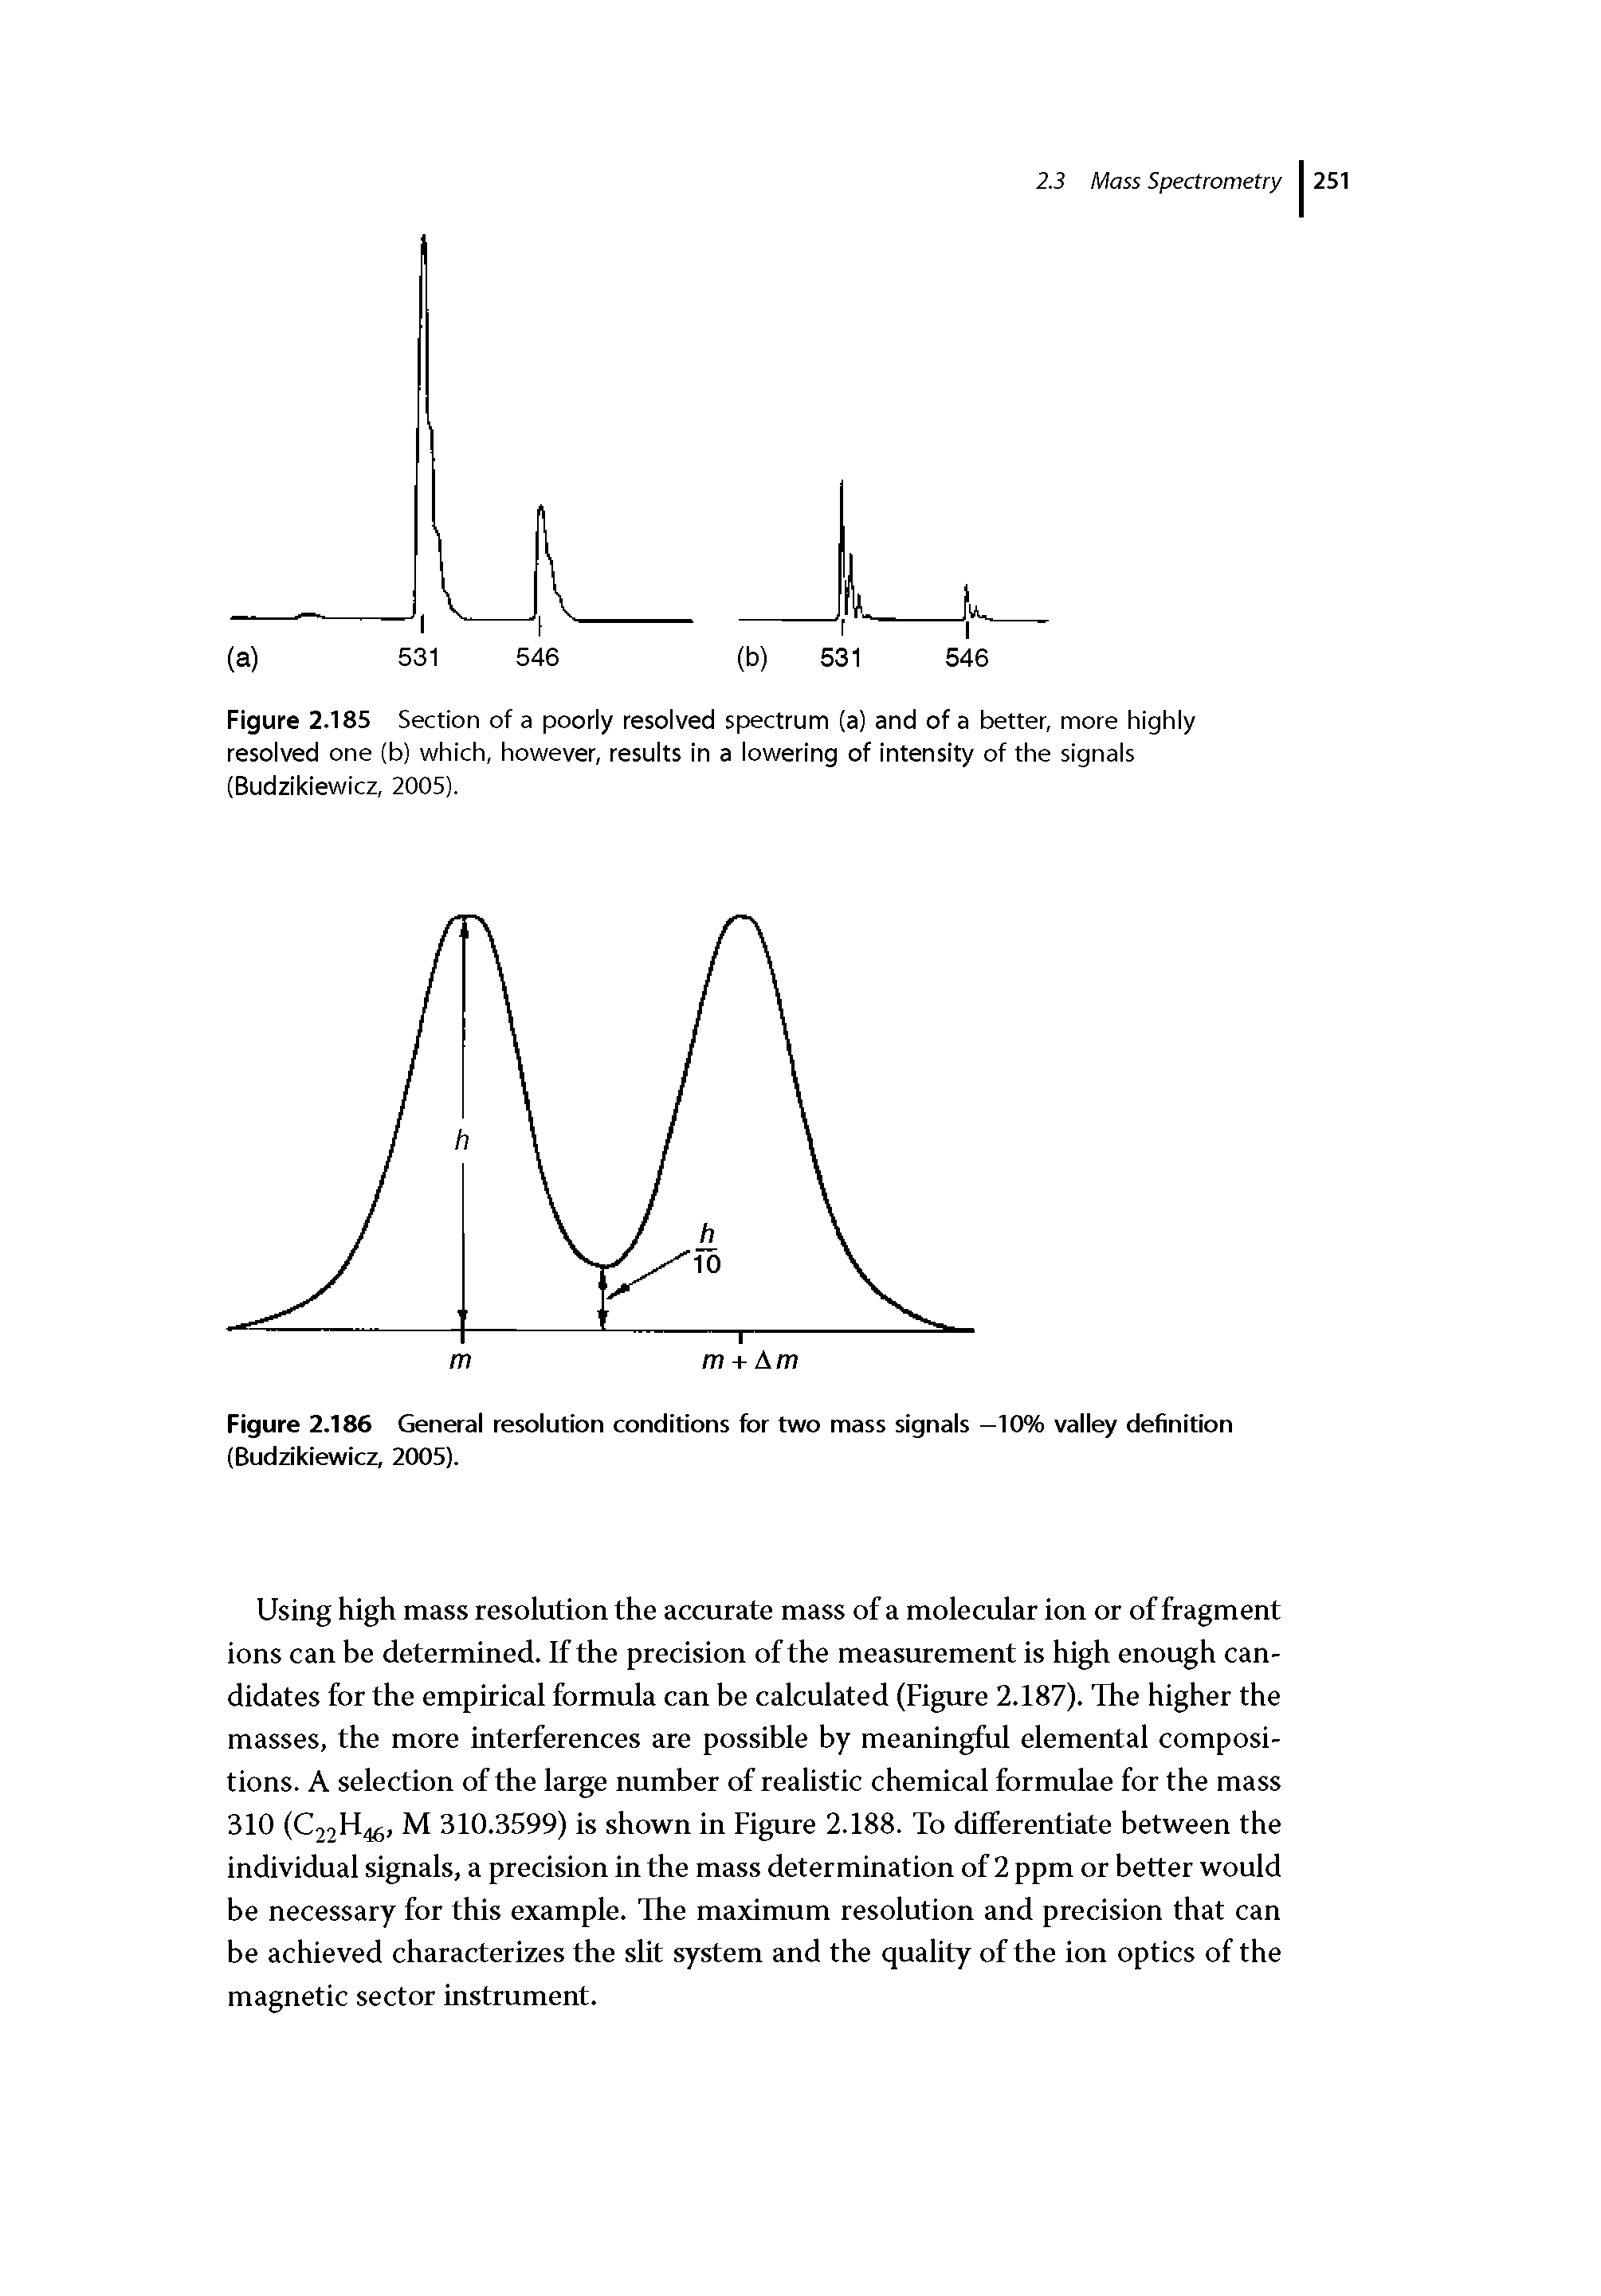 Figure 2.186 General resolution conditions for two mass signals —10% valley definition (Budzikiewicz, 2005).